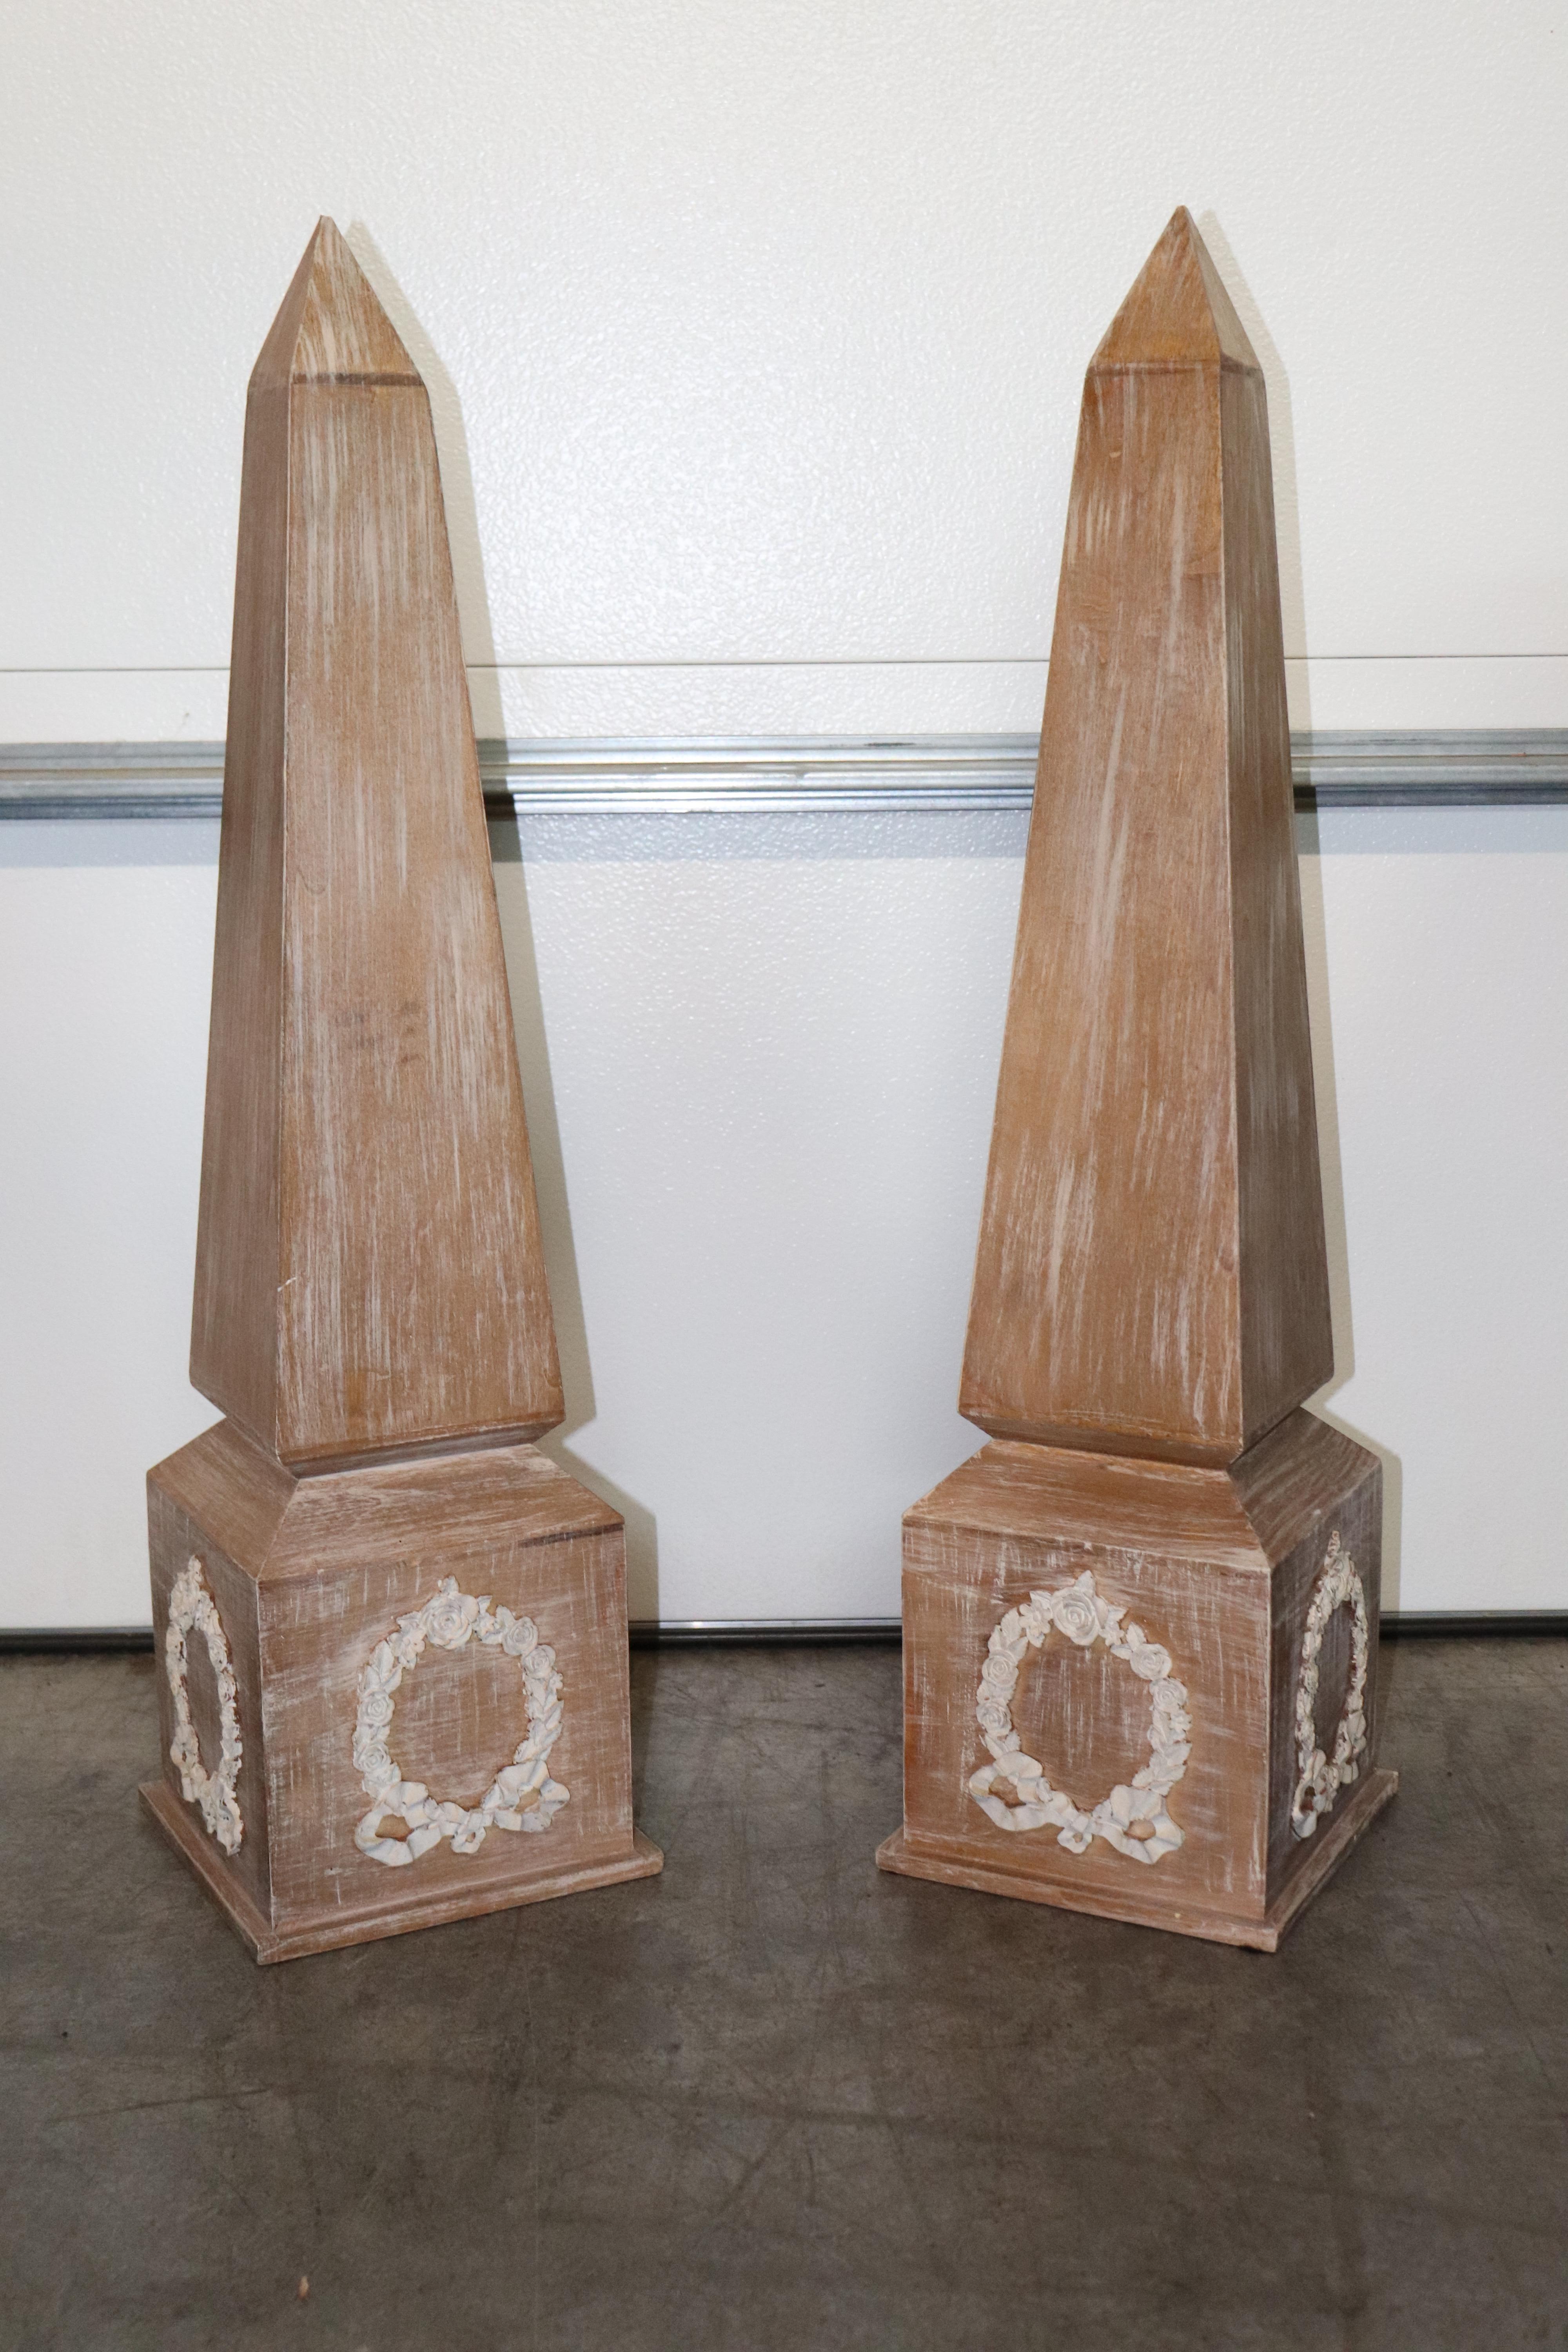 This is a wonderful pair of Egyptian revival obelisks done in the French empire style with carved wreathes on each side of the base. The obelisks are made of oak and cerused for a more sophisticated finish. They measure 33.75 inches tall x 8.75